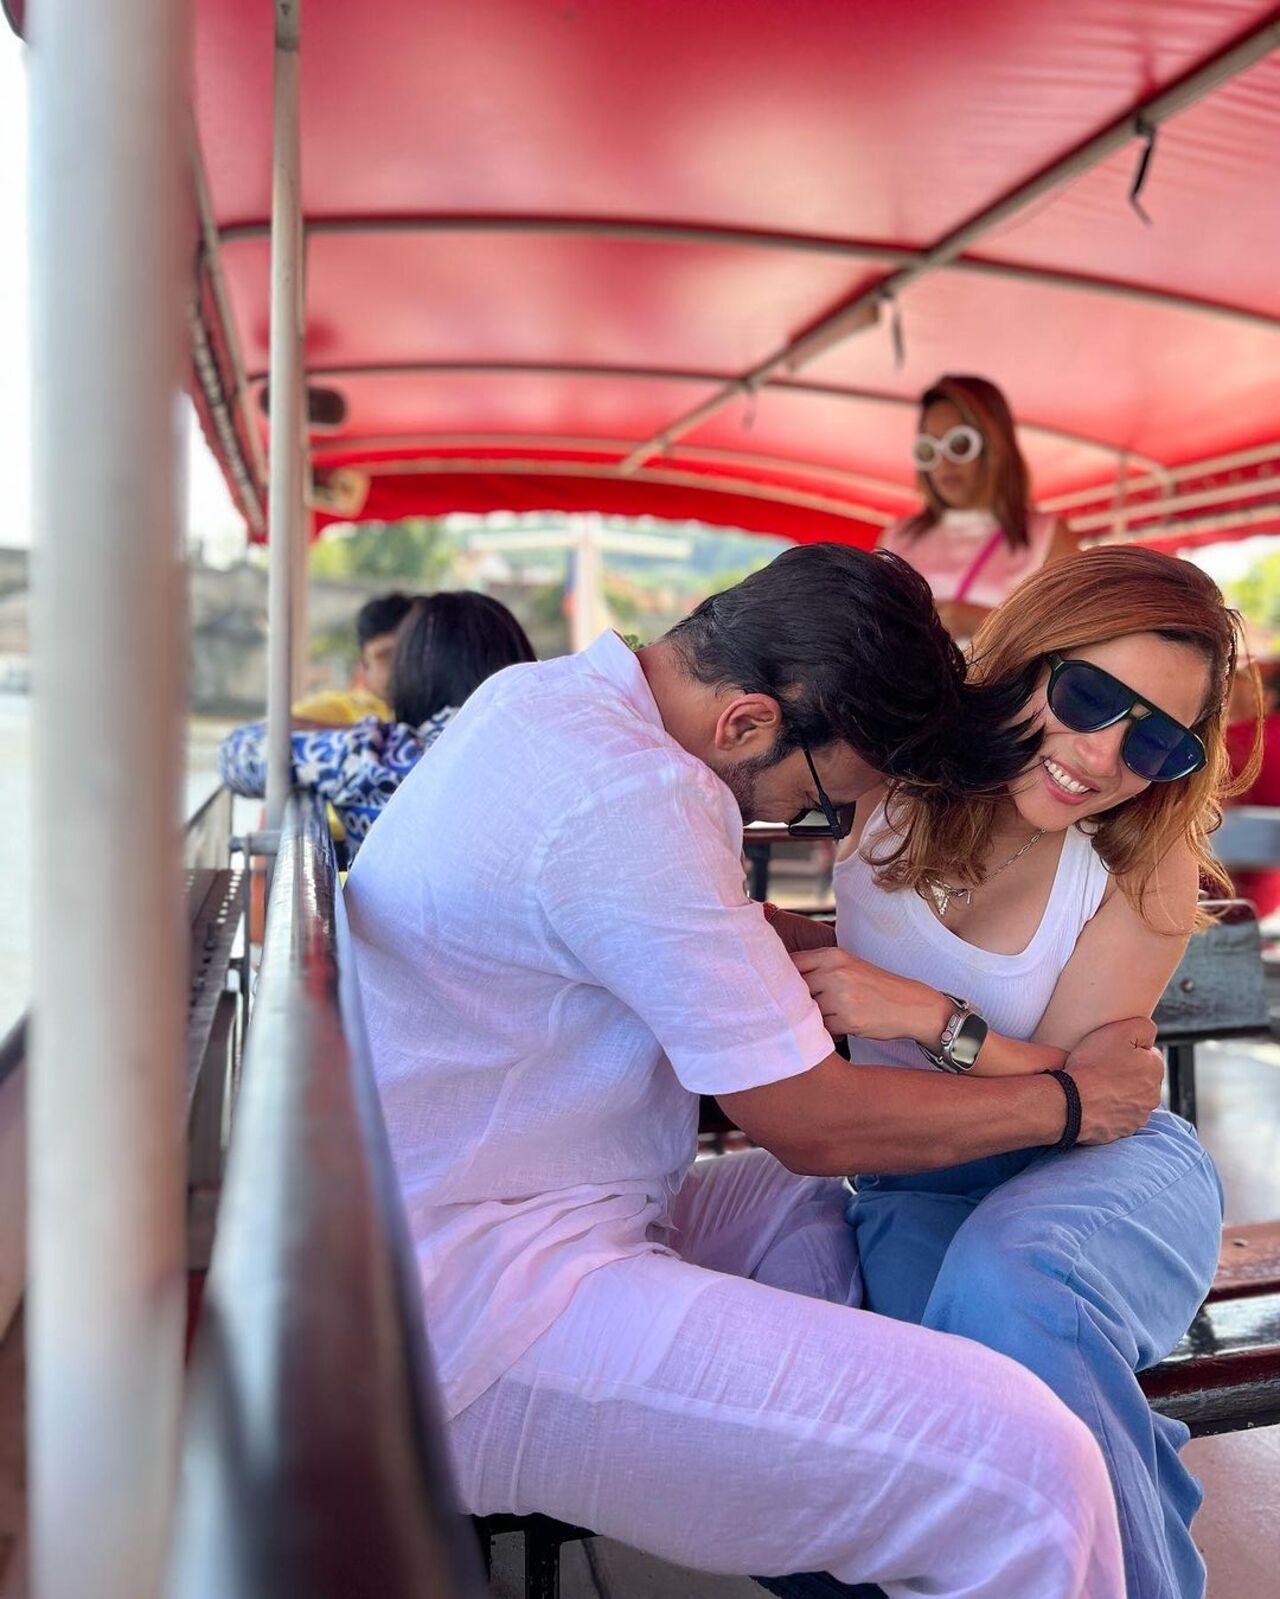 Ankita Lokhande and Vicky Jain recently shared beautiful photos on a yacht that left their fans and followers in awe